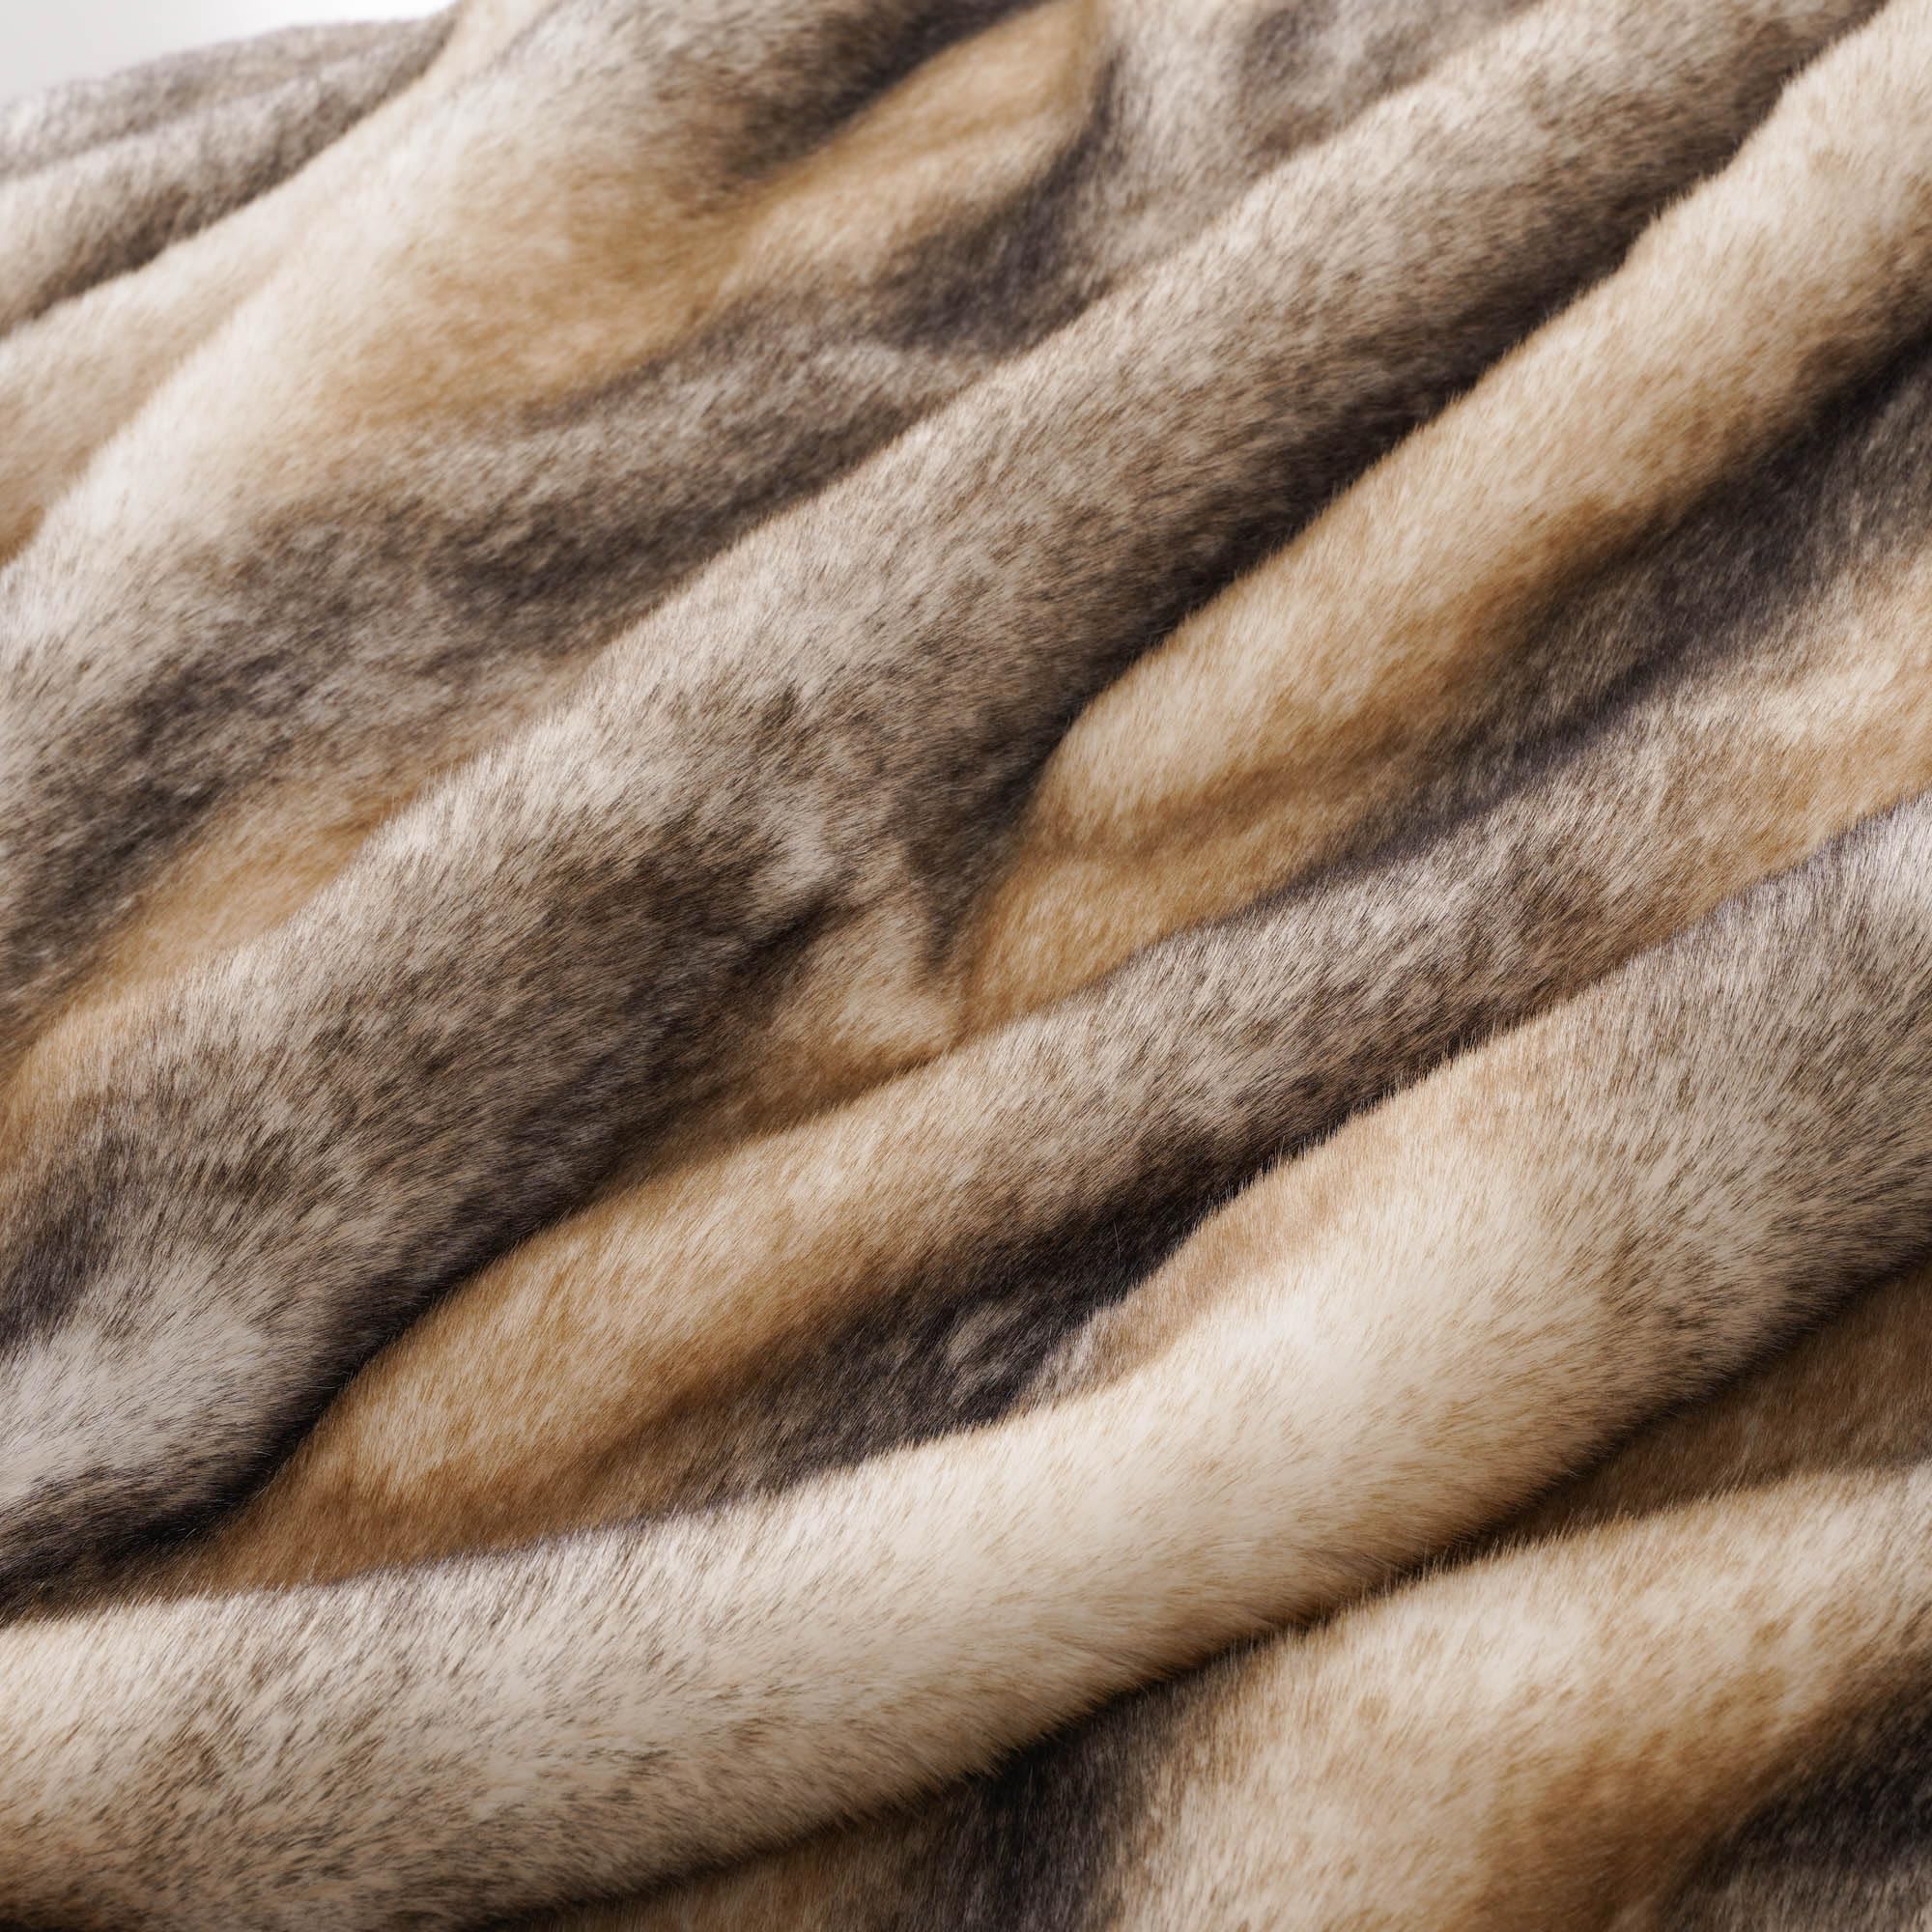 Luxury Faux Fur Throw Blanket, Soft Cozy Mink Fur Blanket for Couch, Sofa, Chair, Bed